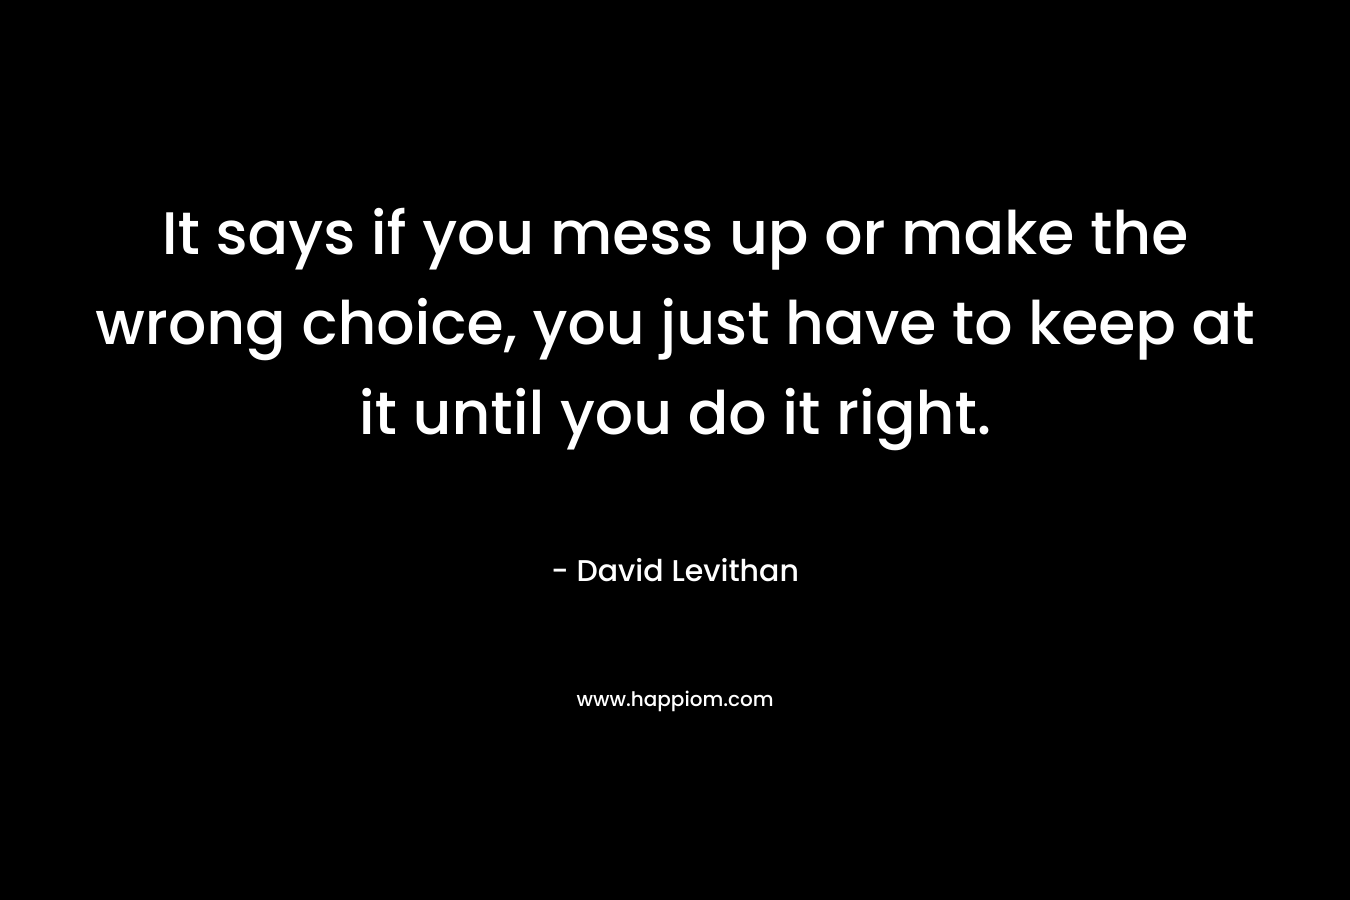 It says if you mess up or make the wrong choice, you just have to keep at it until you do it right. – David Levithan